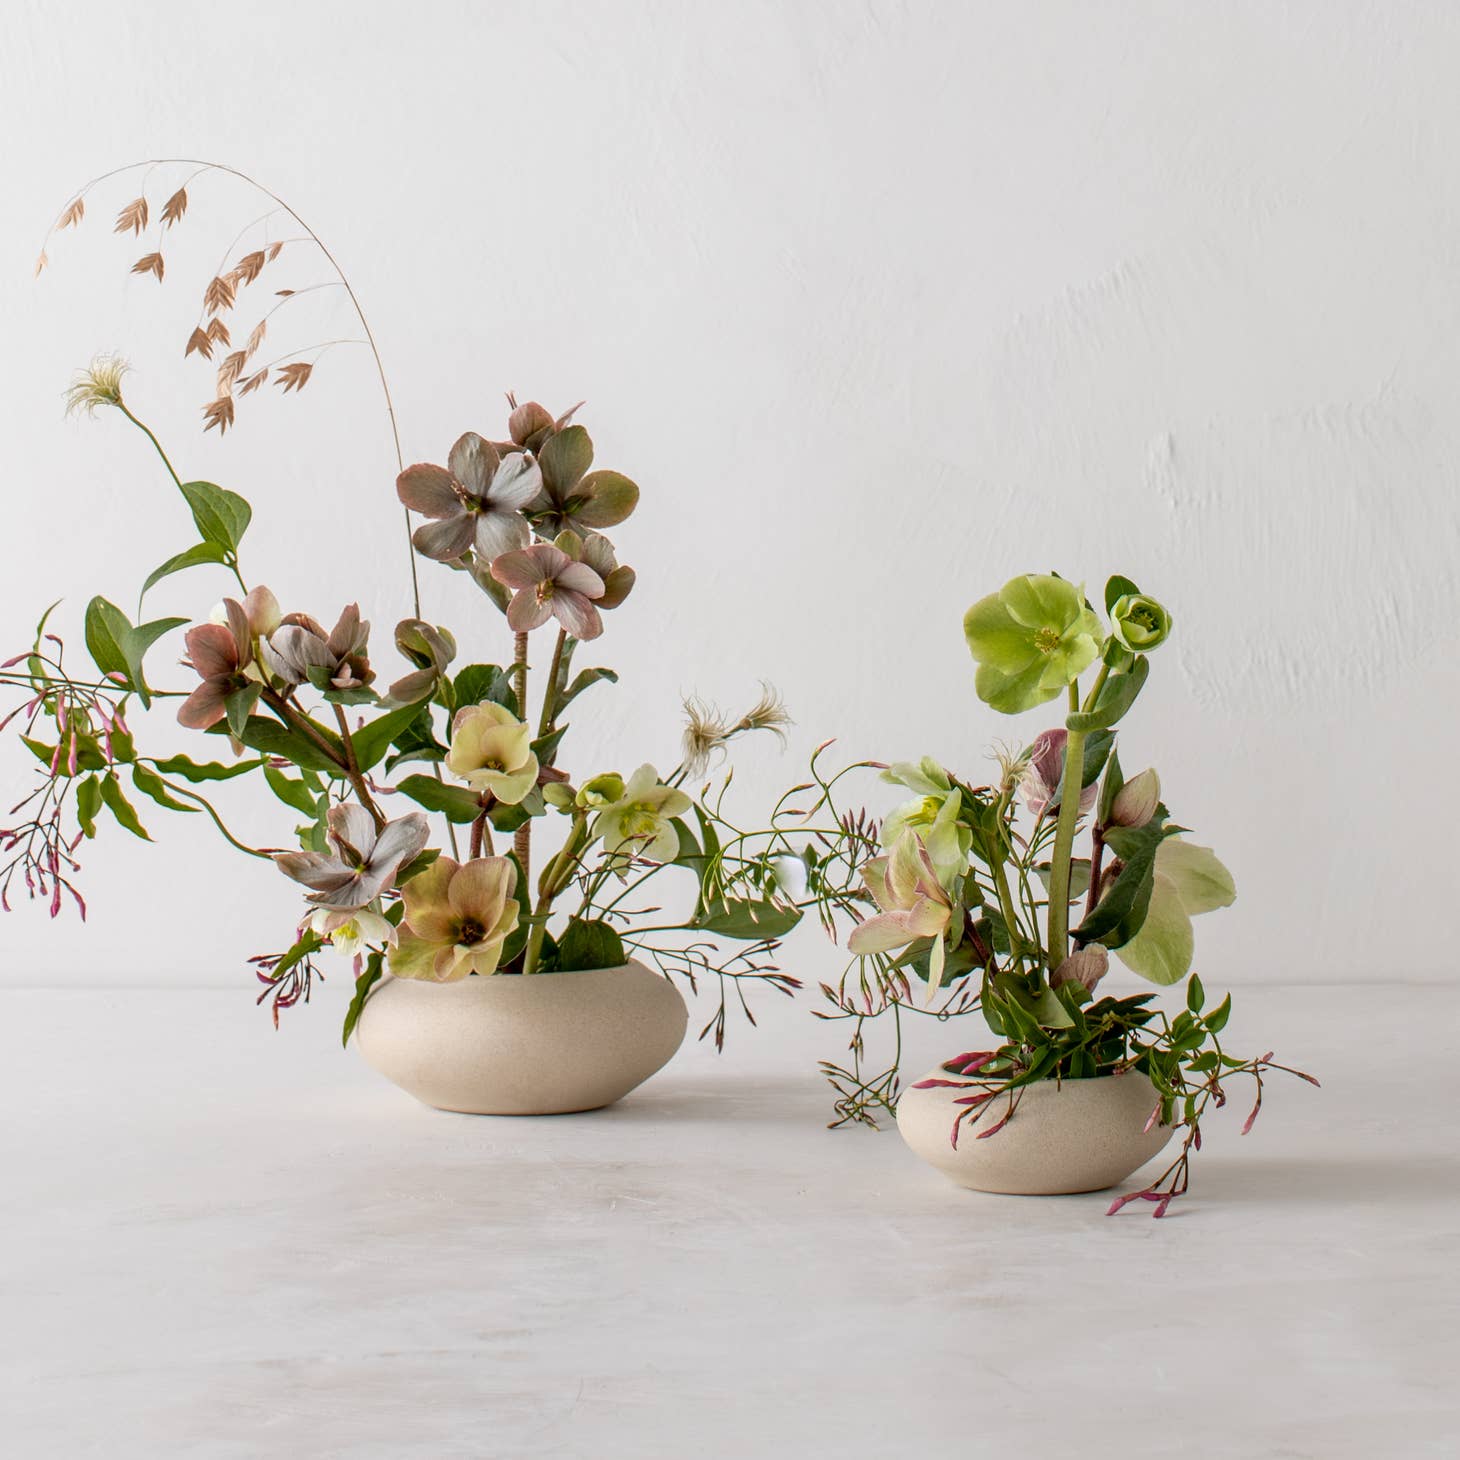 convivial ikebana vase no 1 / Slow down and enjoy the subtle beauty of nature with a handmade ceramic ikebana vase. This round, shallow vase is designed for minimal, ikebana inspired arrangements. Handmade with proprietary sandstone with an ivory glaze on the interior.